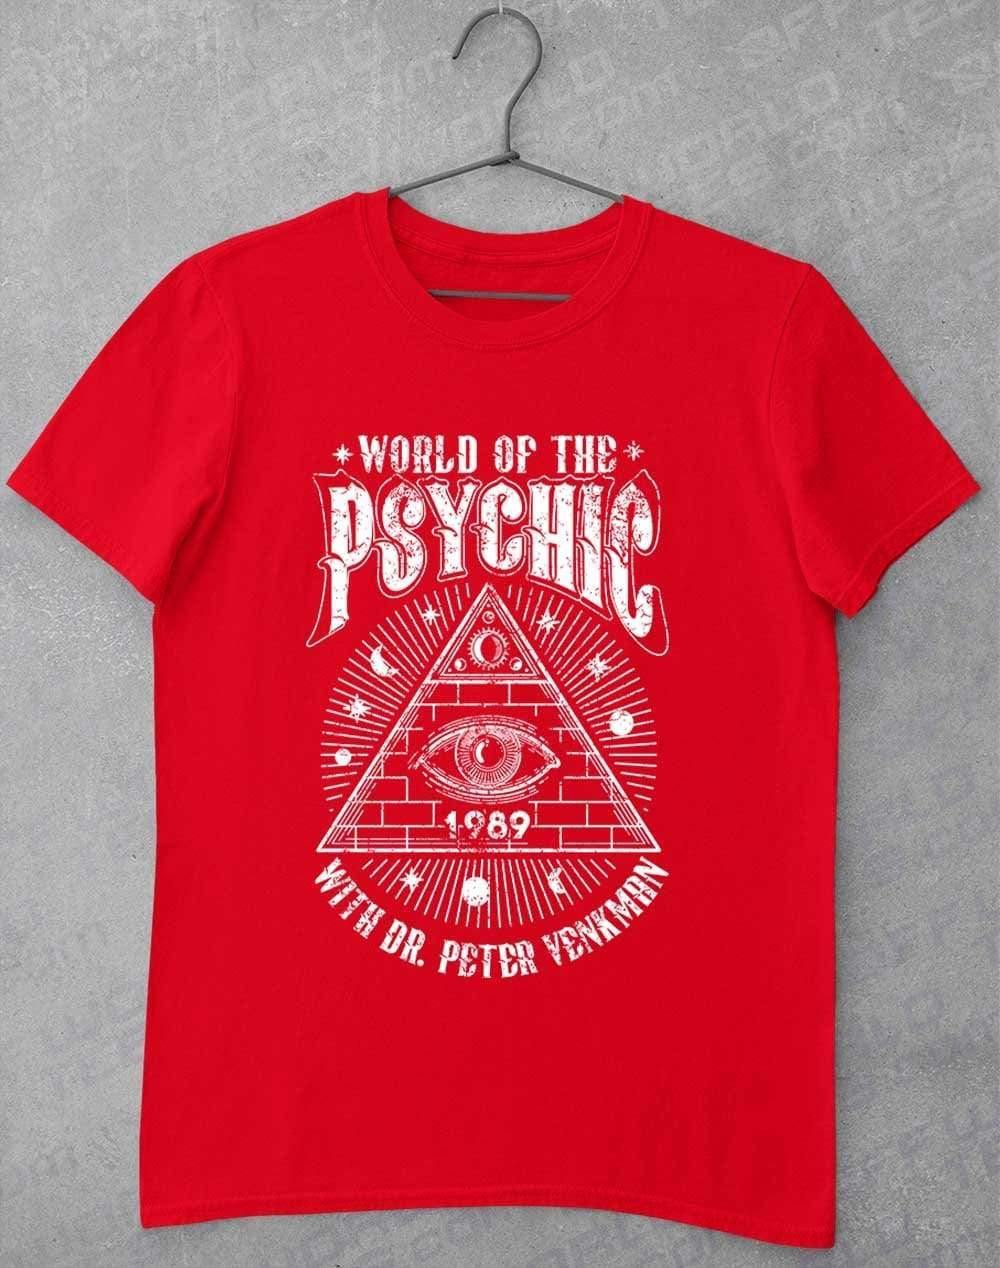 World of the Psychic T-Shirt S / Red  - Off World Tees